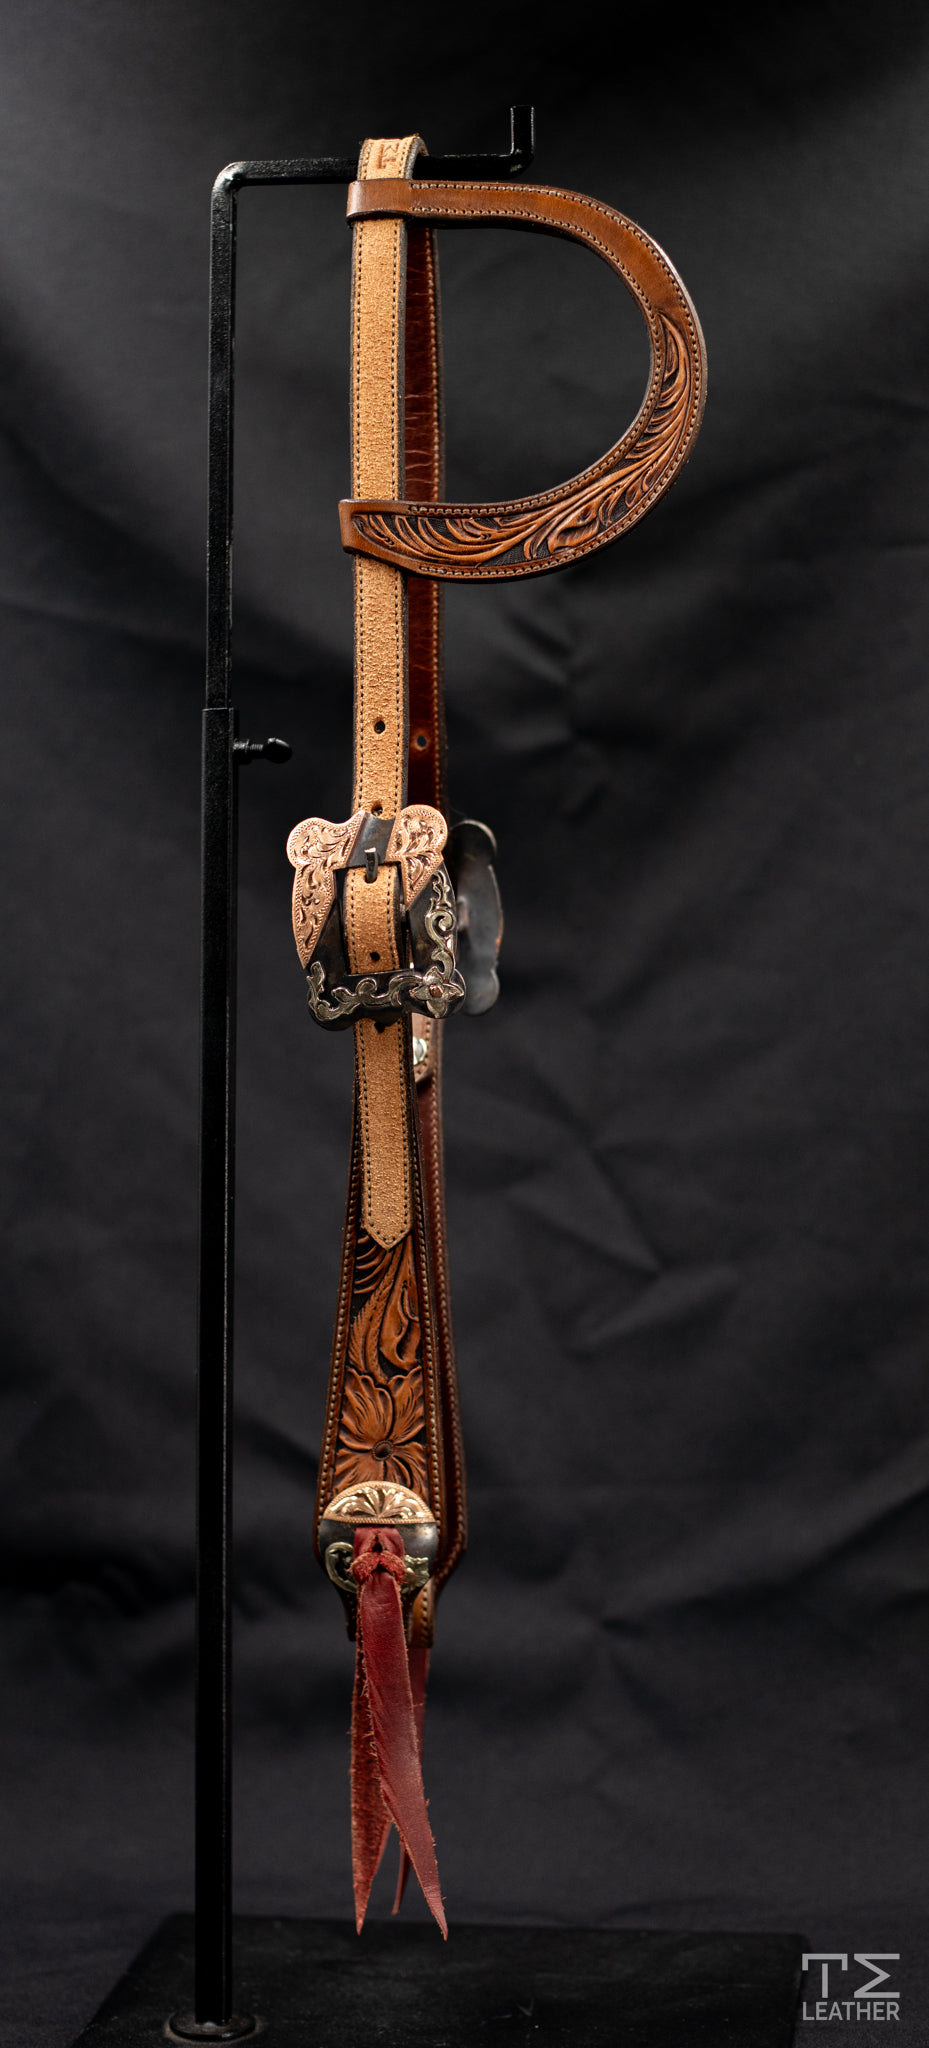 Slide Ear Brown & Black w/ Roughout & Steel Scalloped Square Buckle w/ Copper & Floral Accents & Conchos